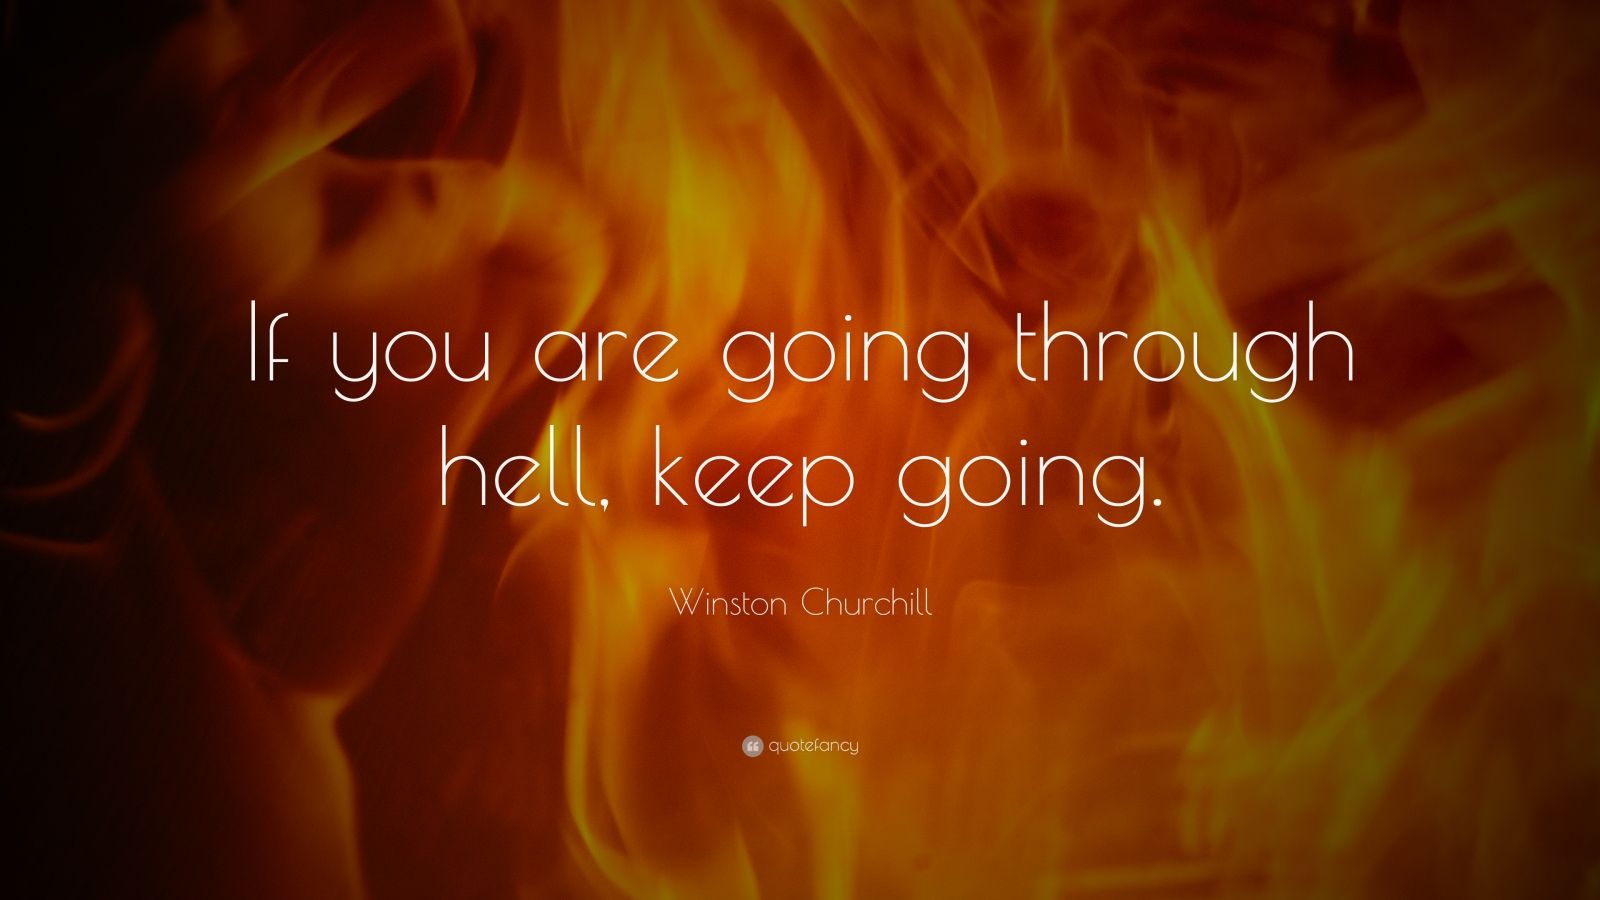 Winston Churchill Quote: “If you are going through hell, keep going.”